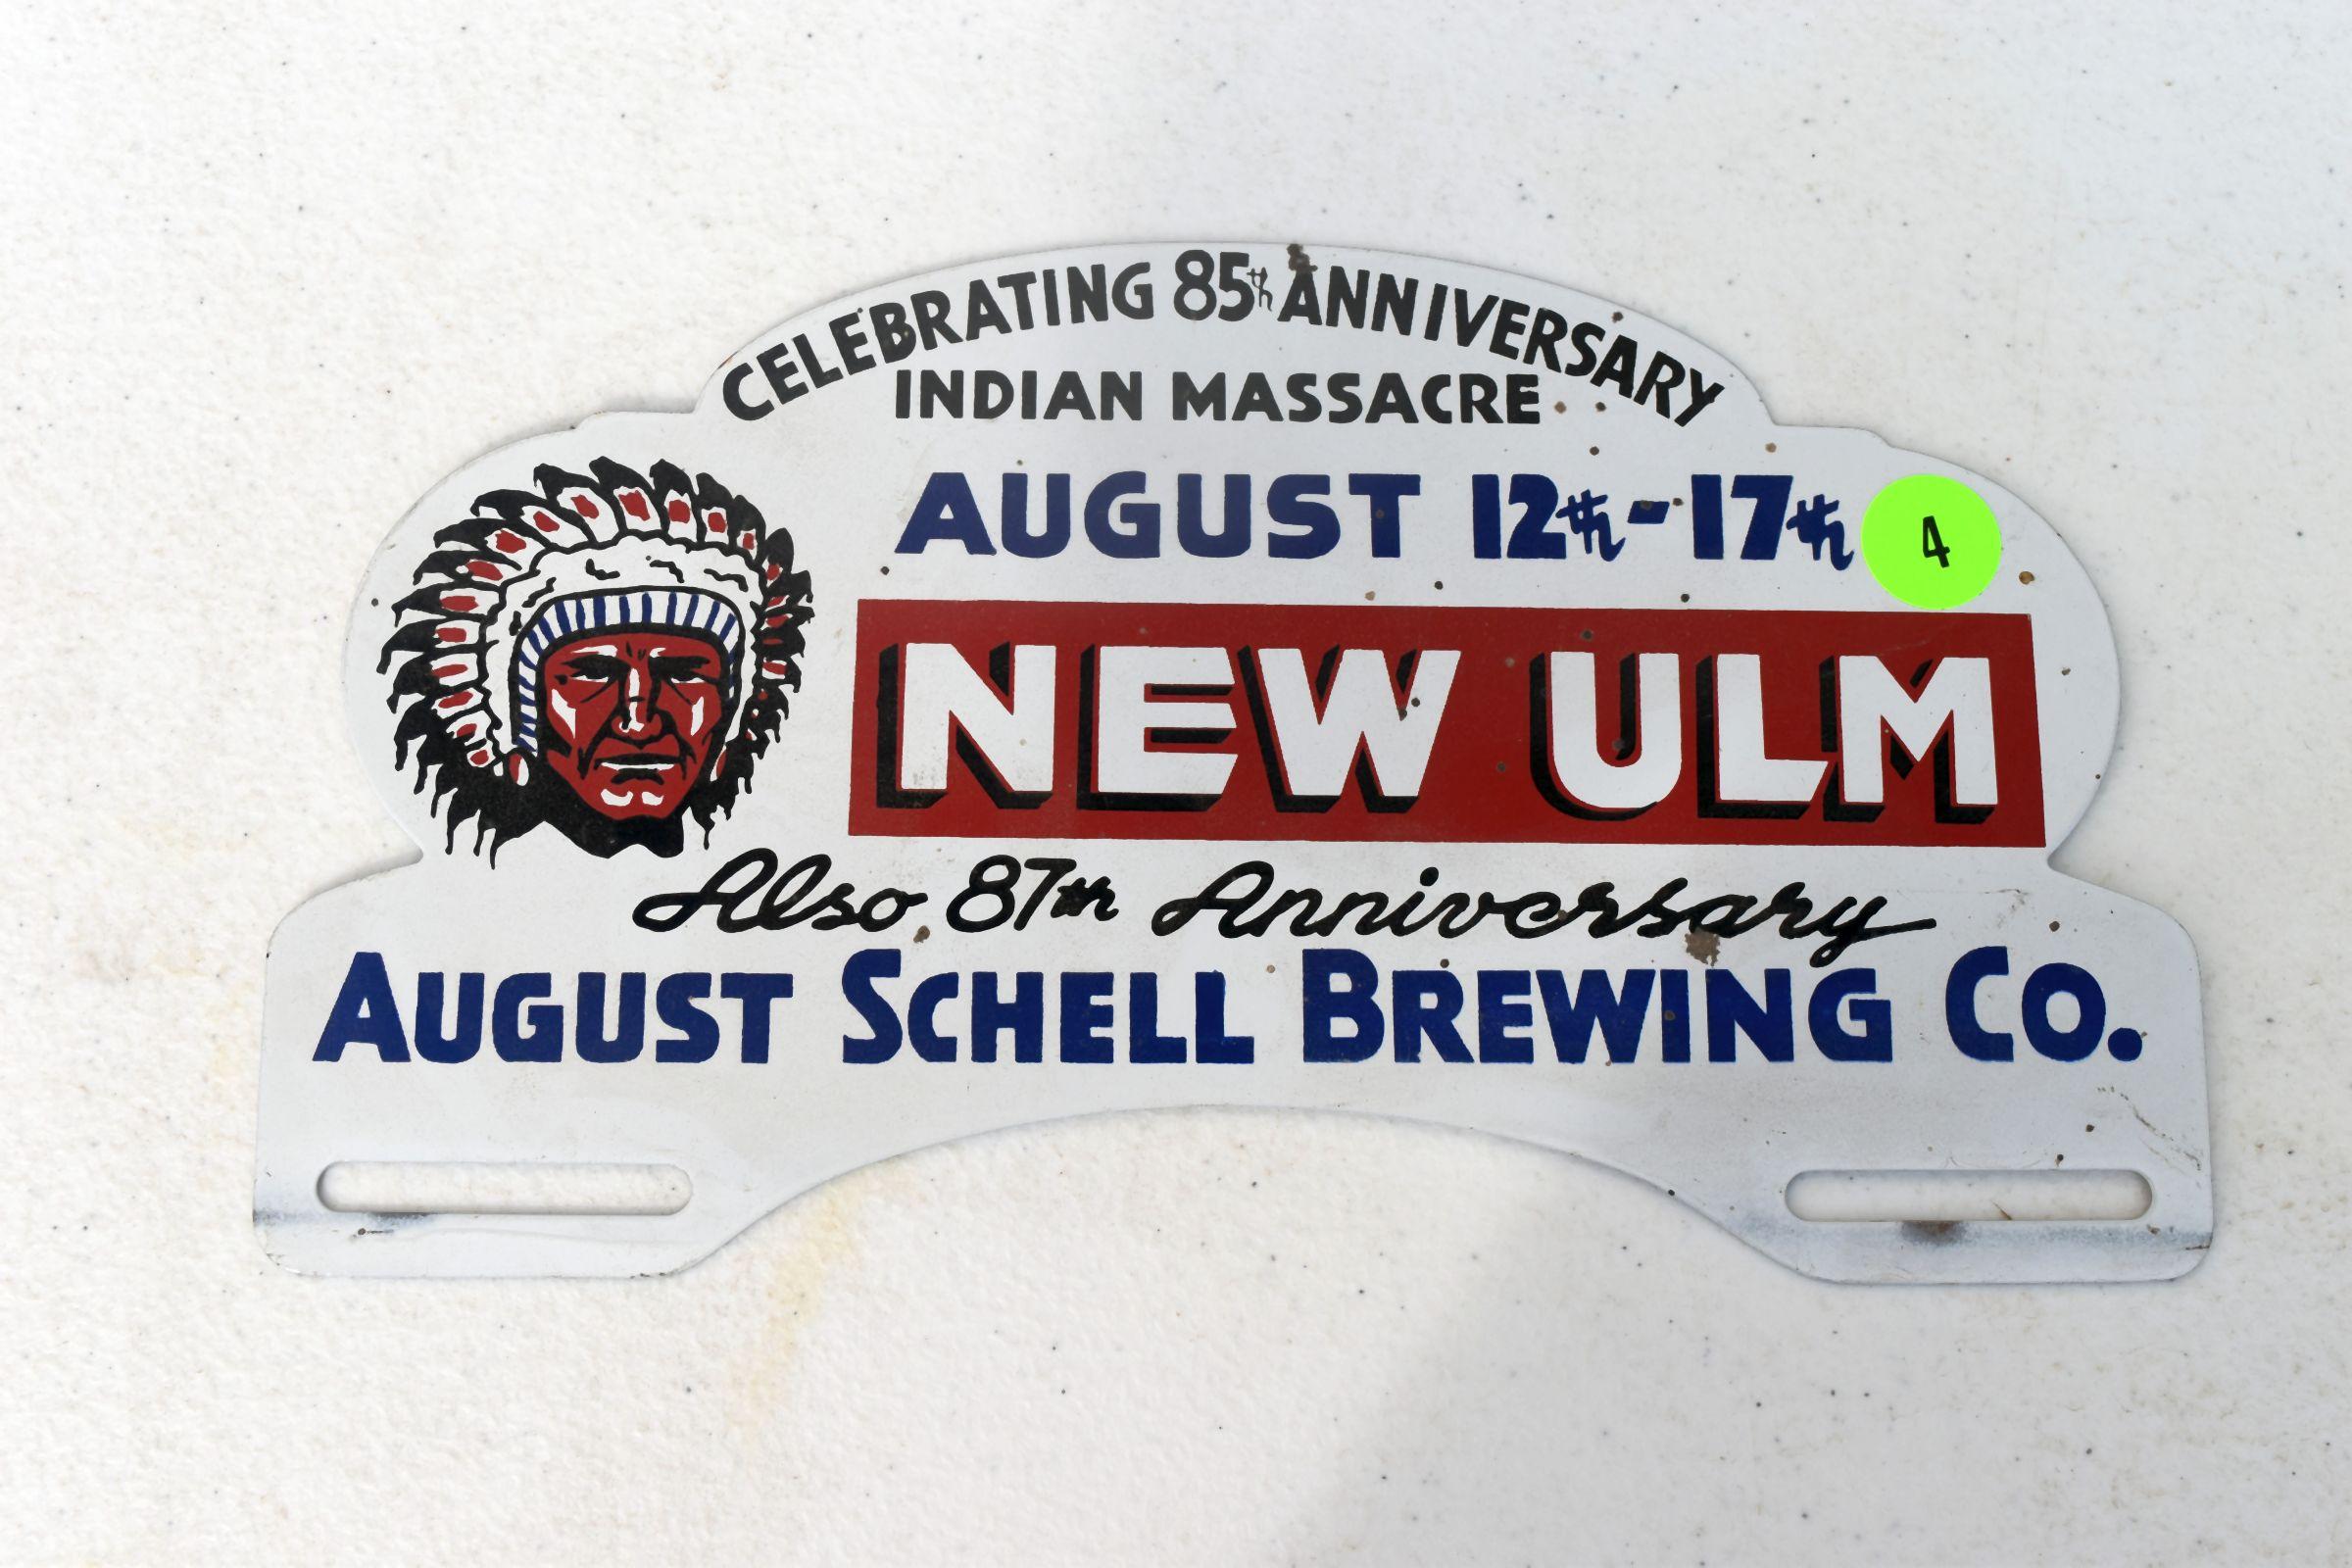 August Shells Brewing Co.New Ulm MN, Celebrating 85th Anniversary Of Indian Massacre,license plate t